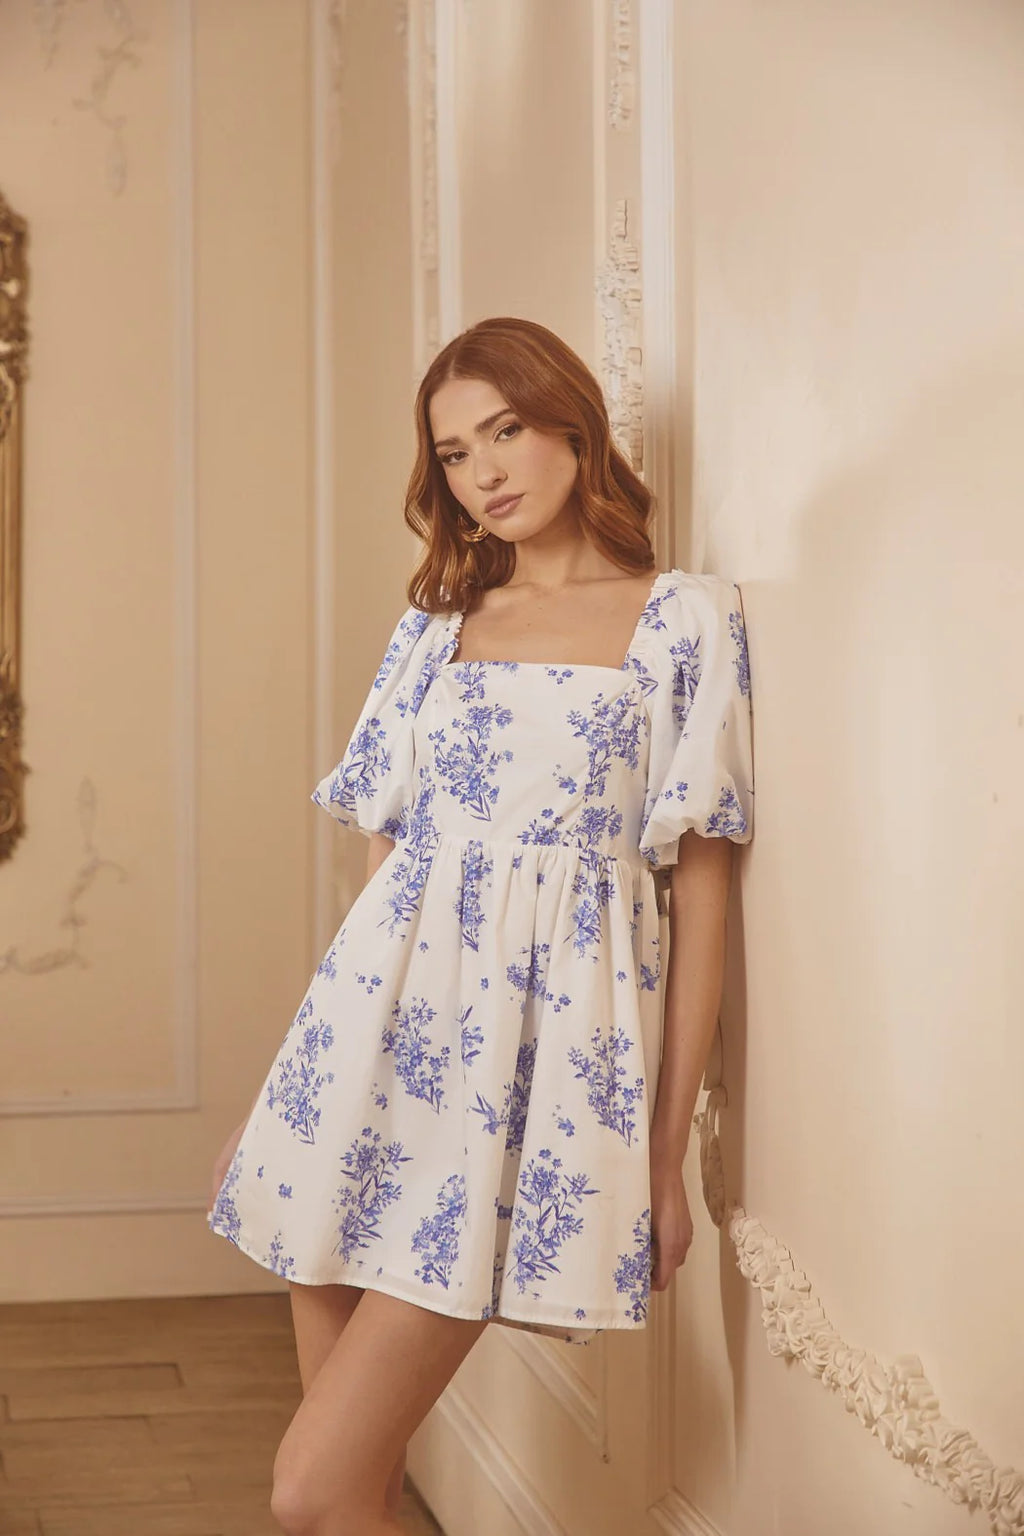 Toile! Blue and White Floral Patterns